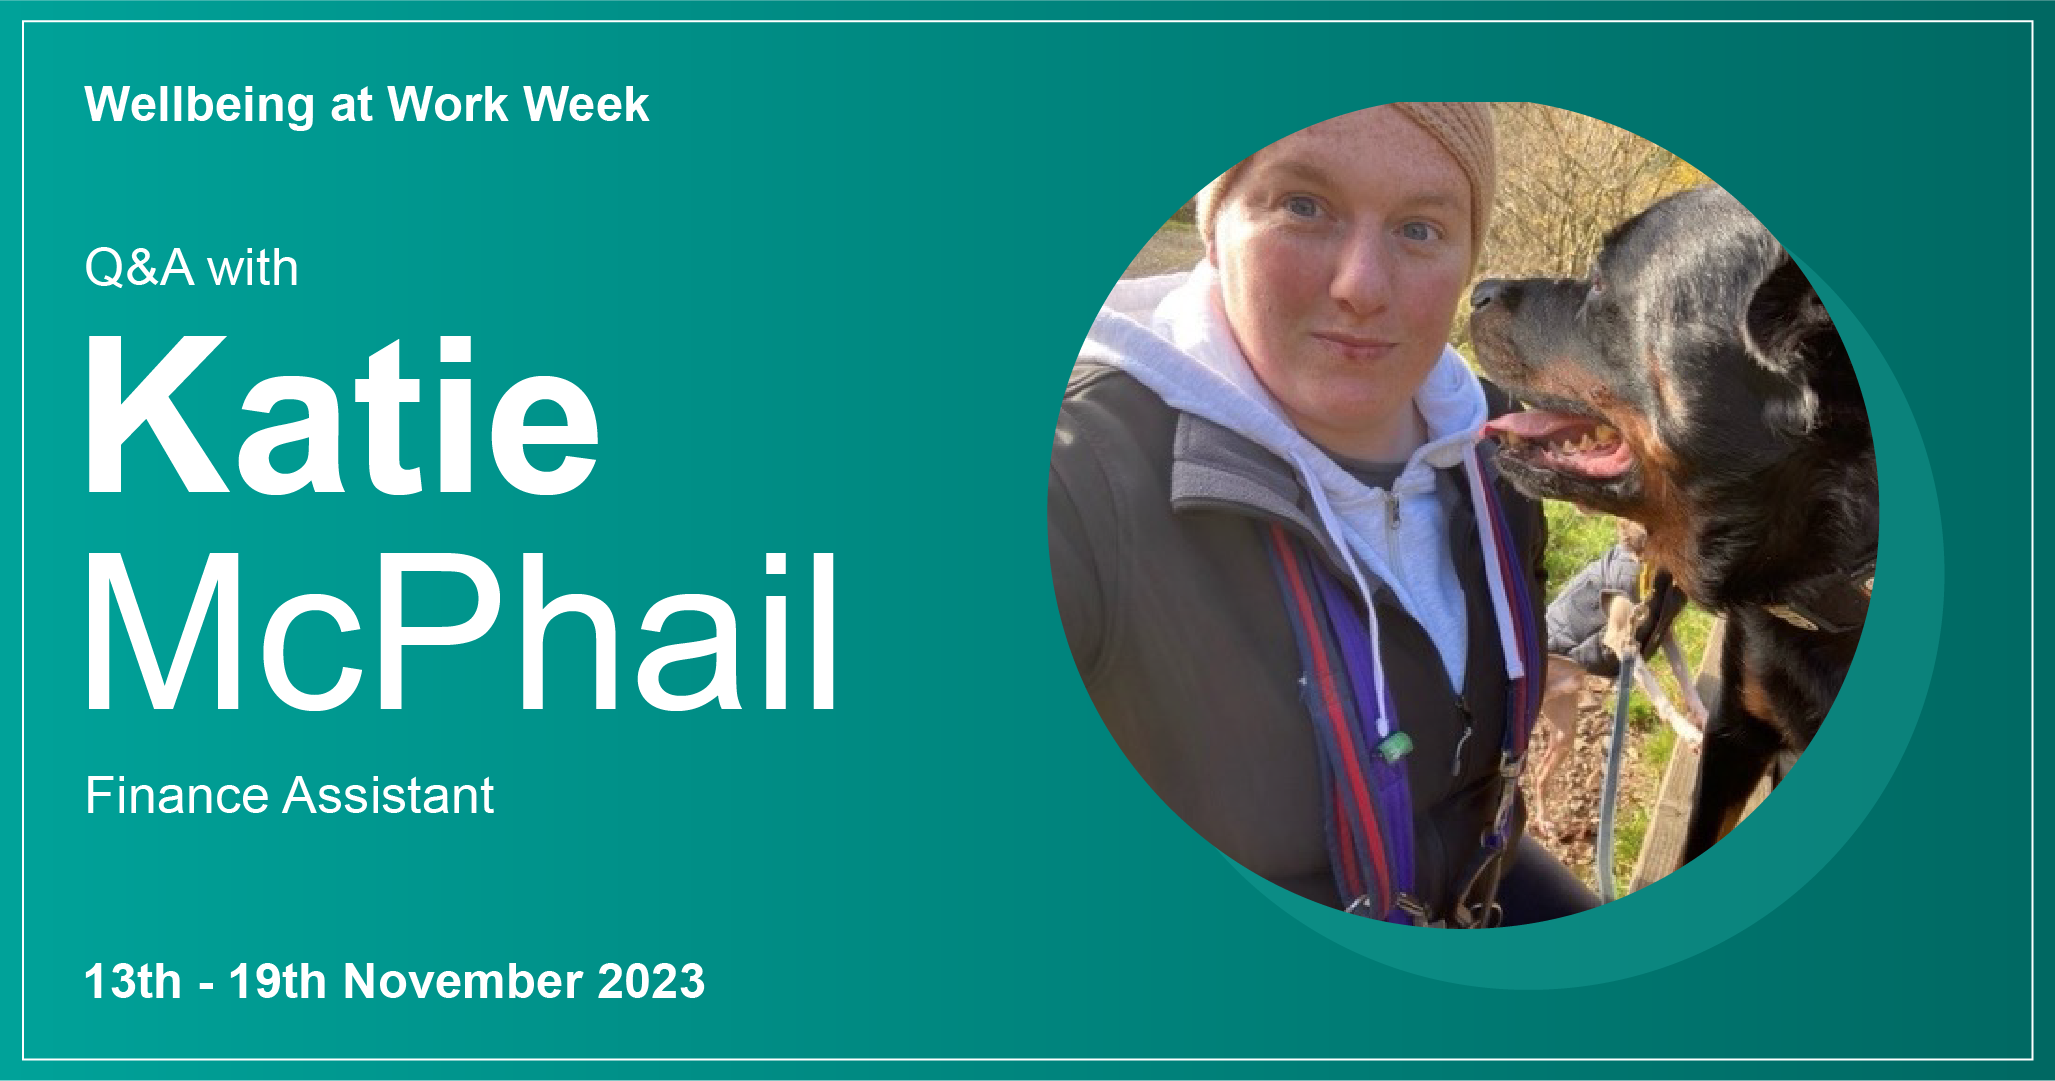 Wellbeing at Work Week 2023: Katie McPhail, Finance Assistant